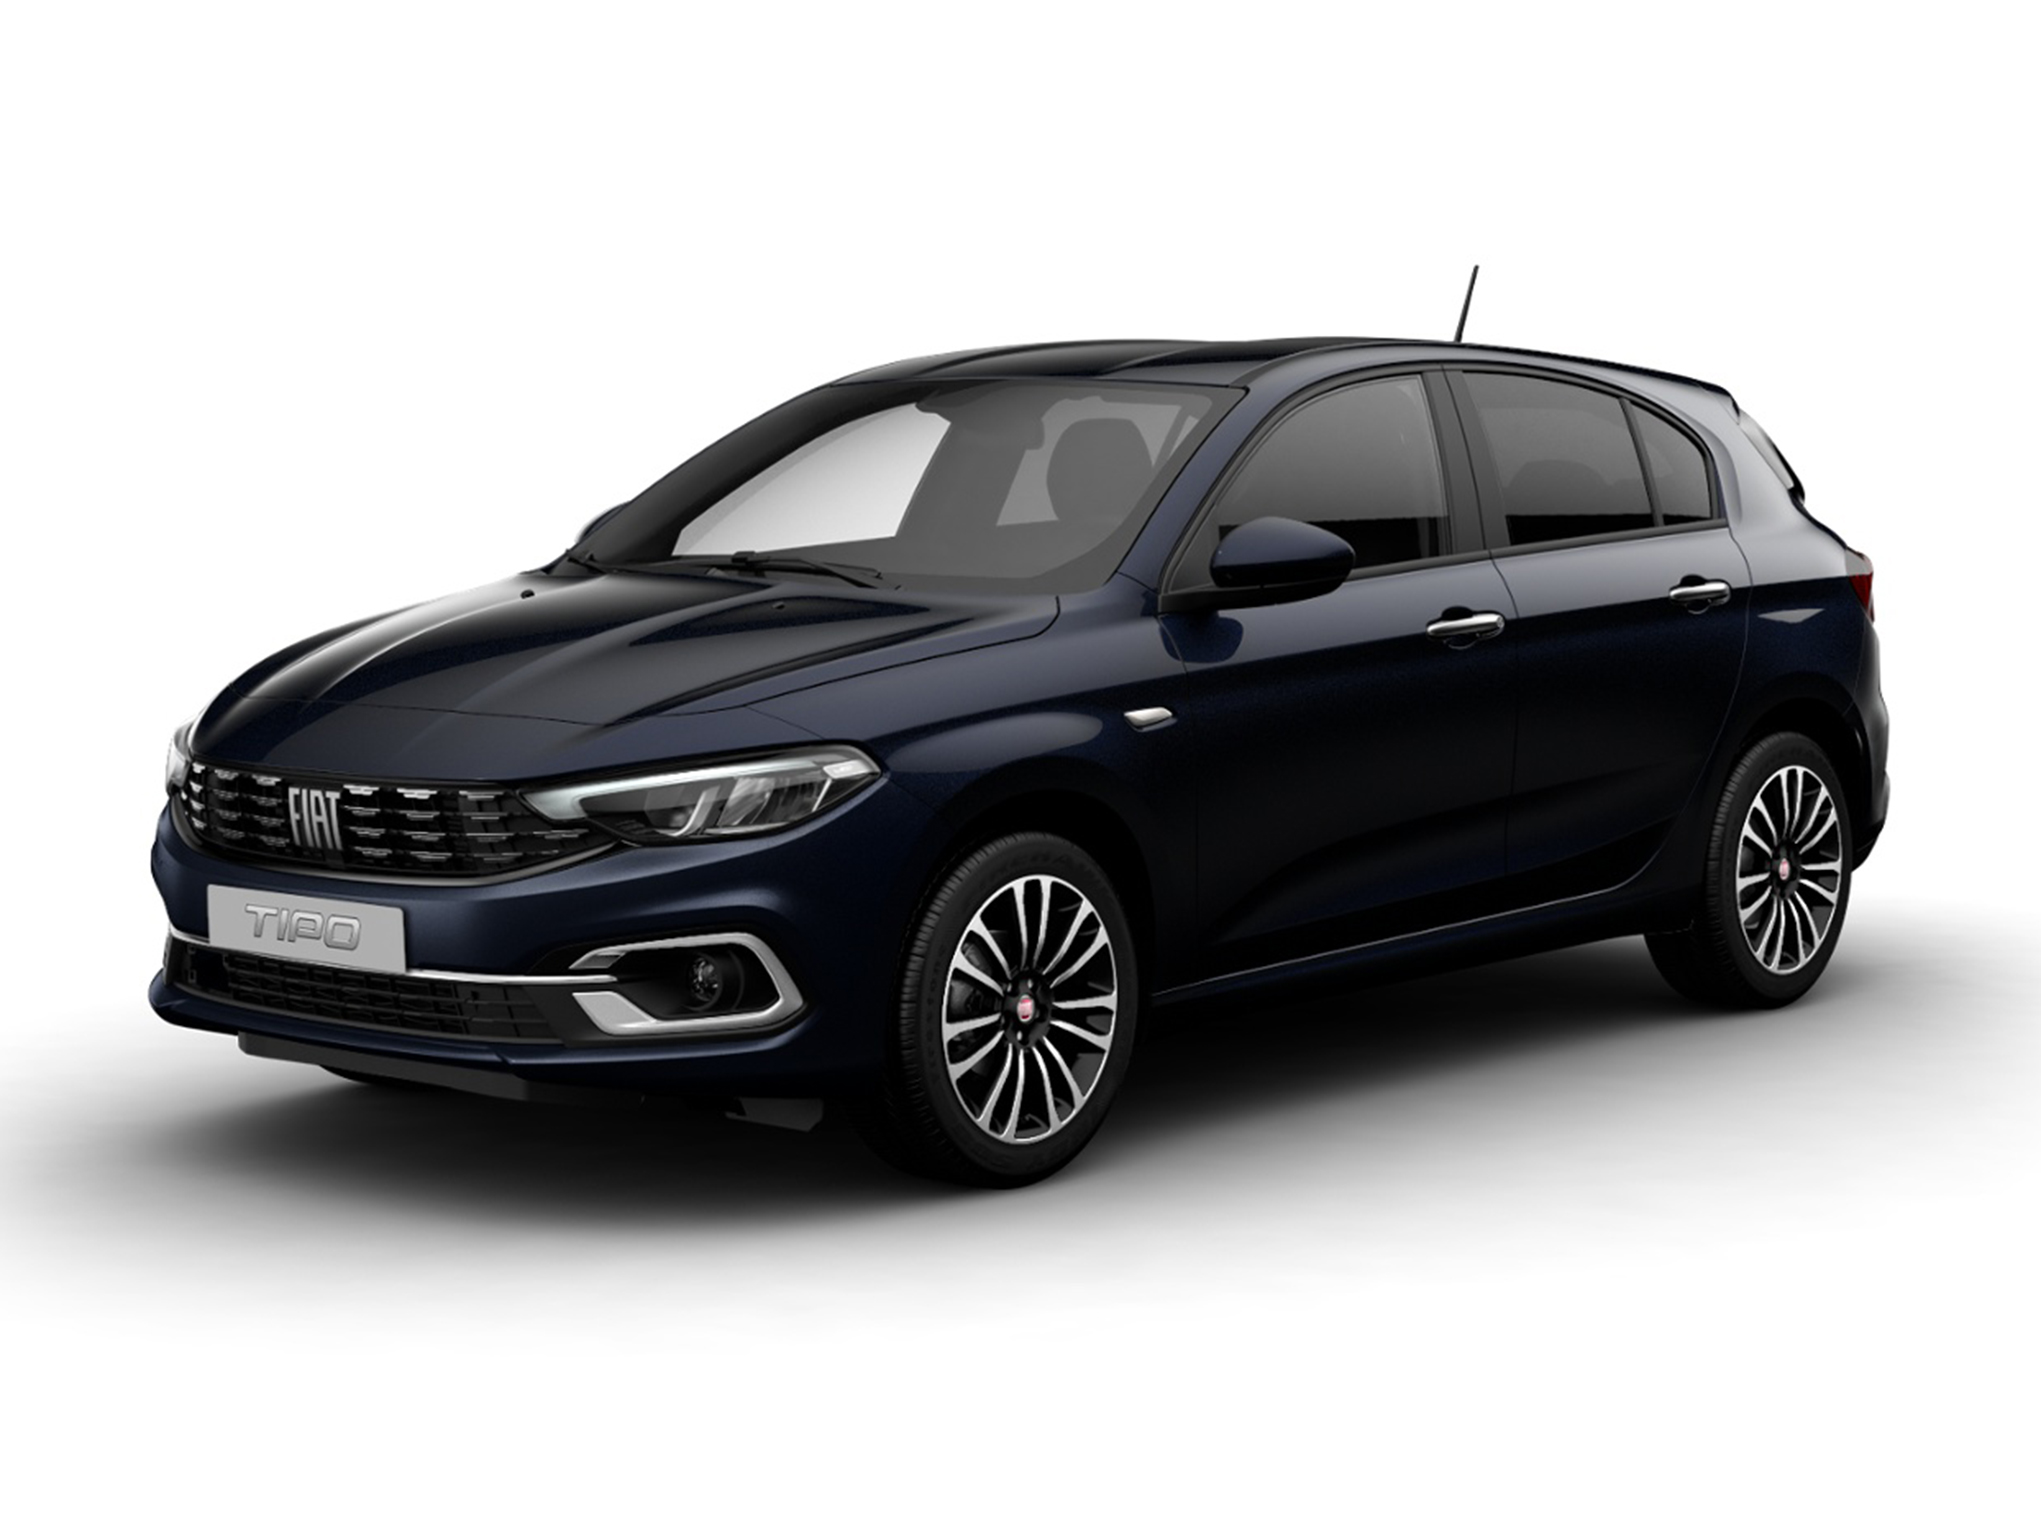 Fiat Tipo Cars For Sale | AutoTrader UK